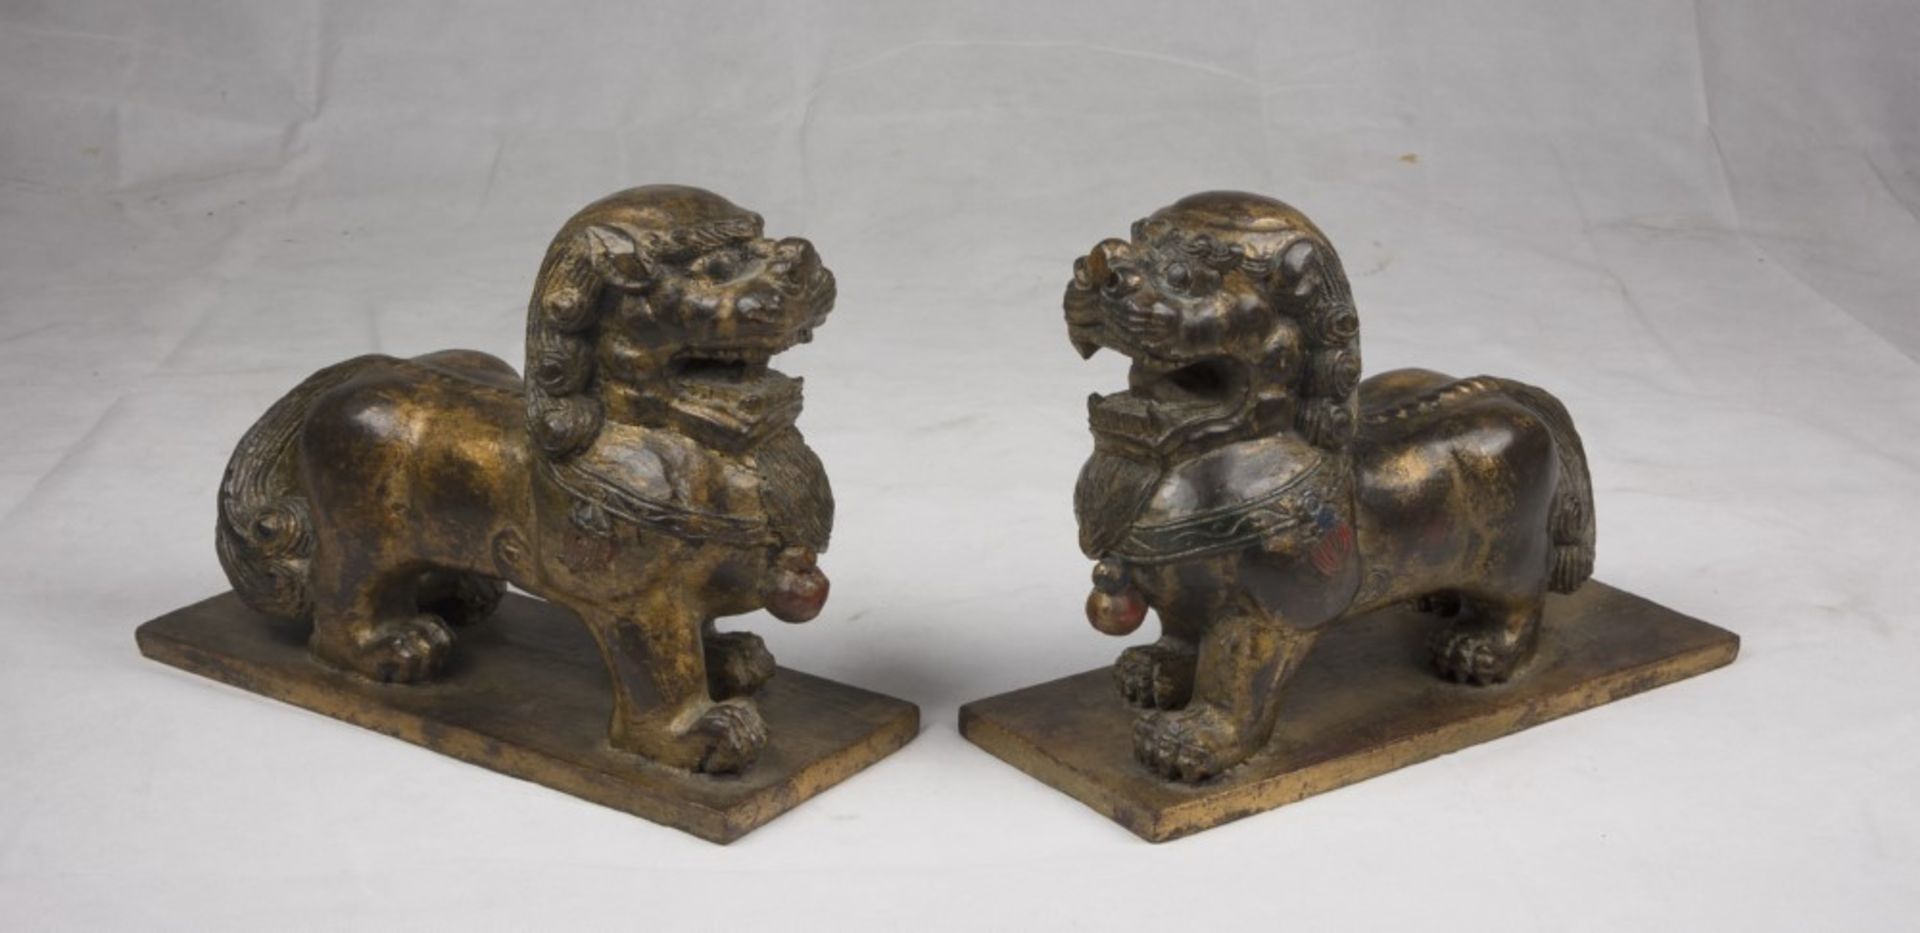 A pair of Chinese wood sculpture, depicting Buddhist lions. 20th century. Measures cm. 23,5 x 33 x